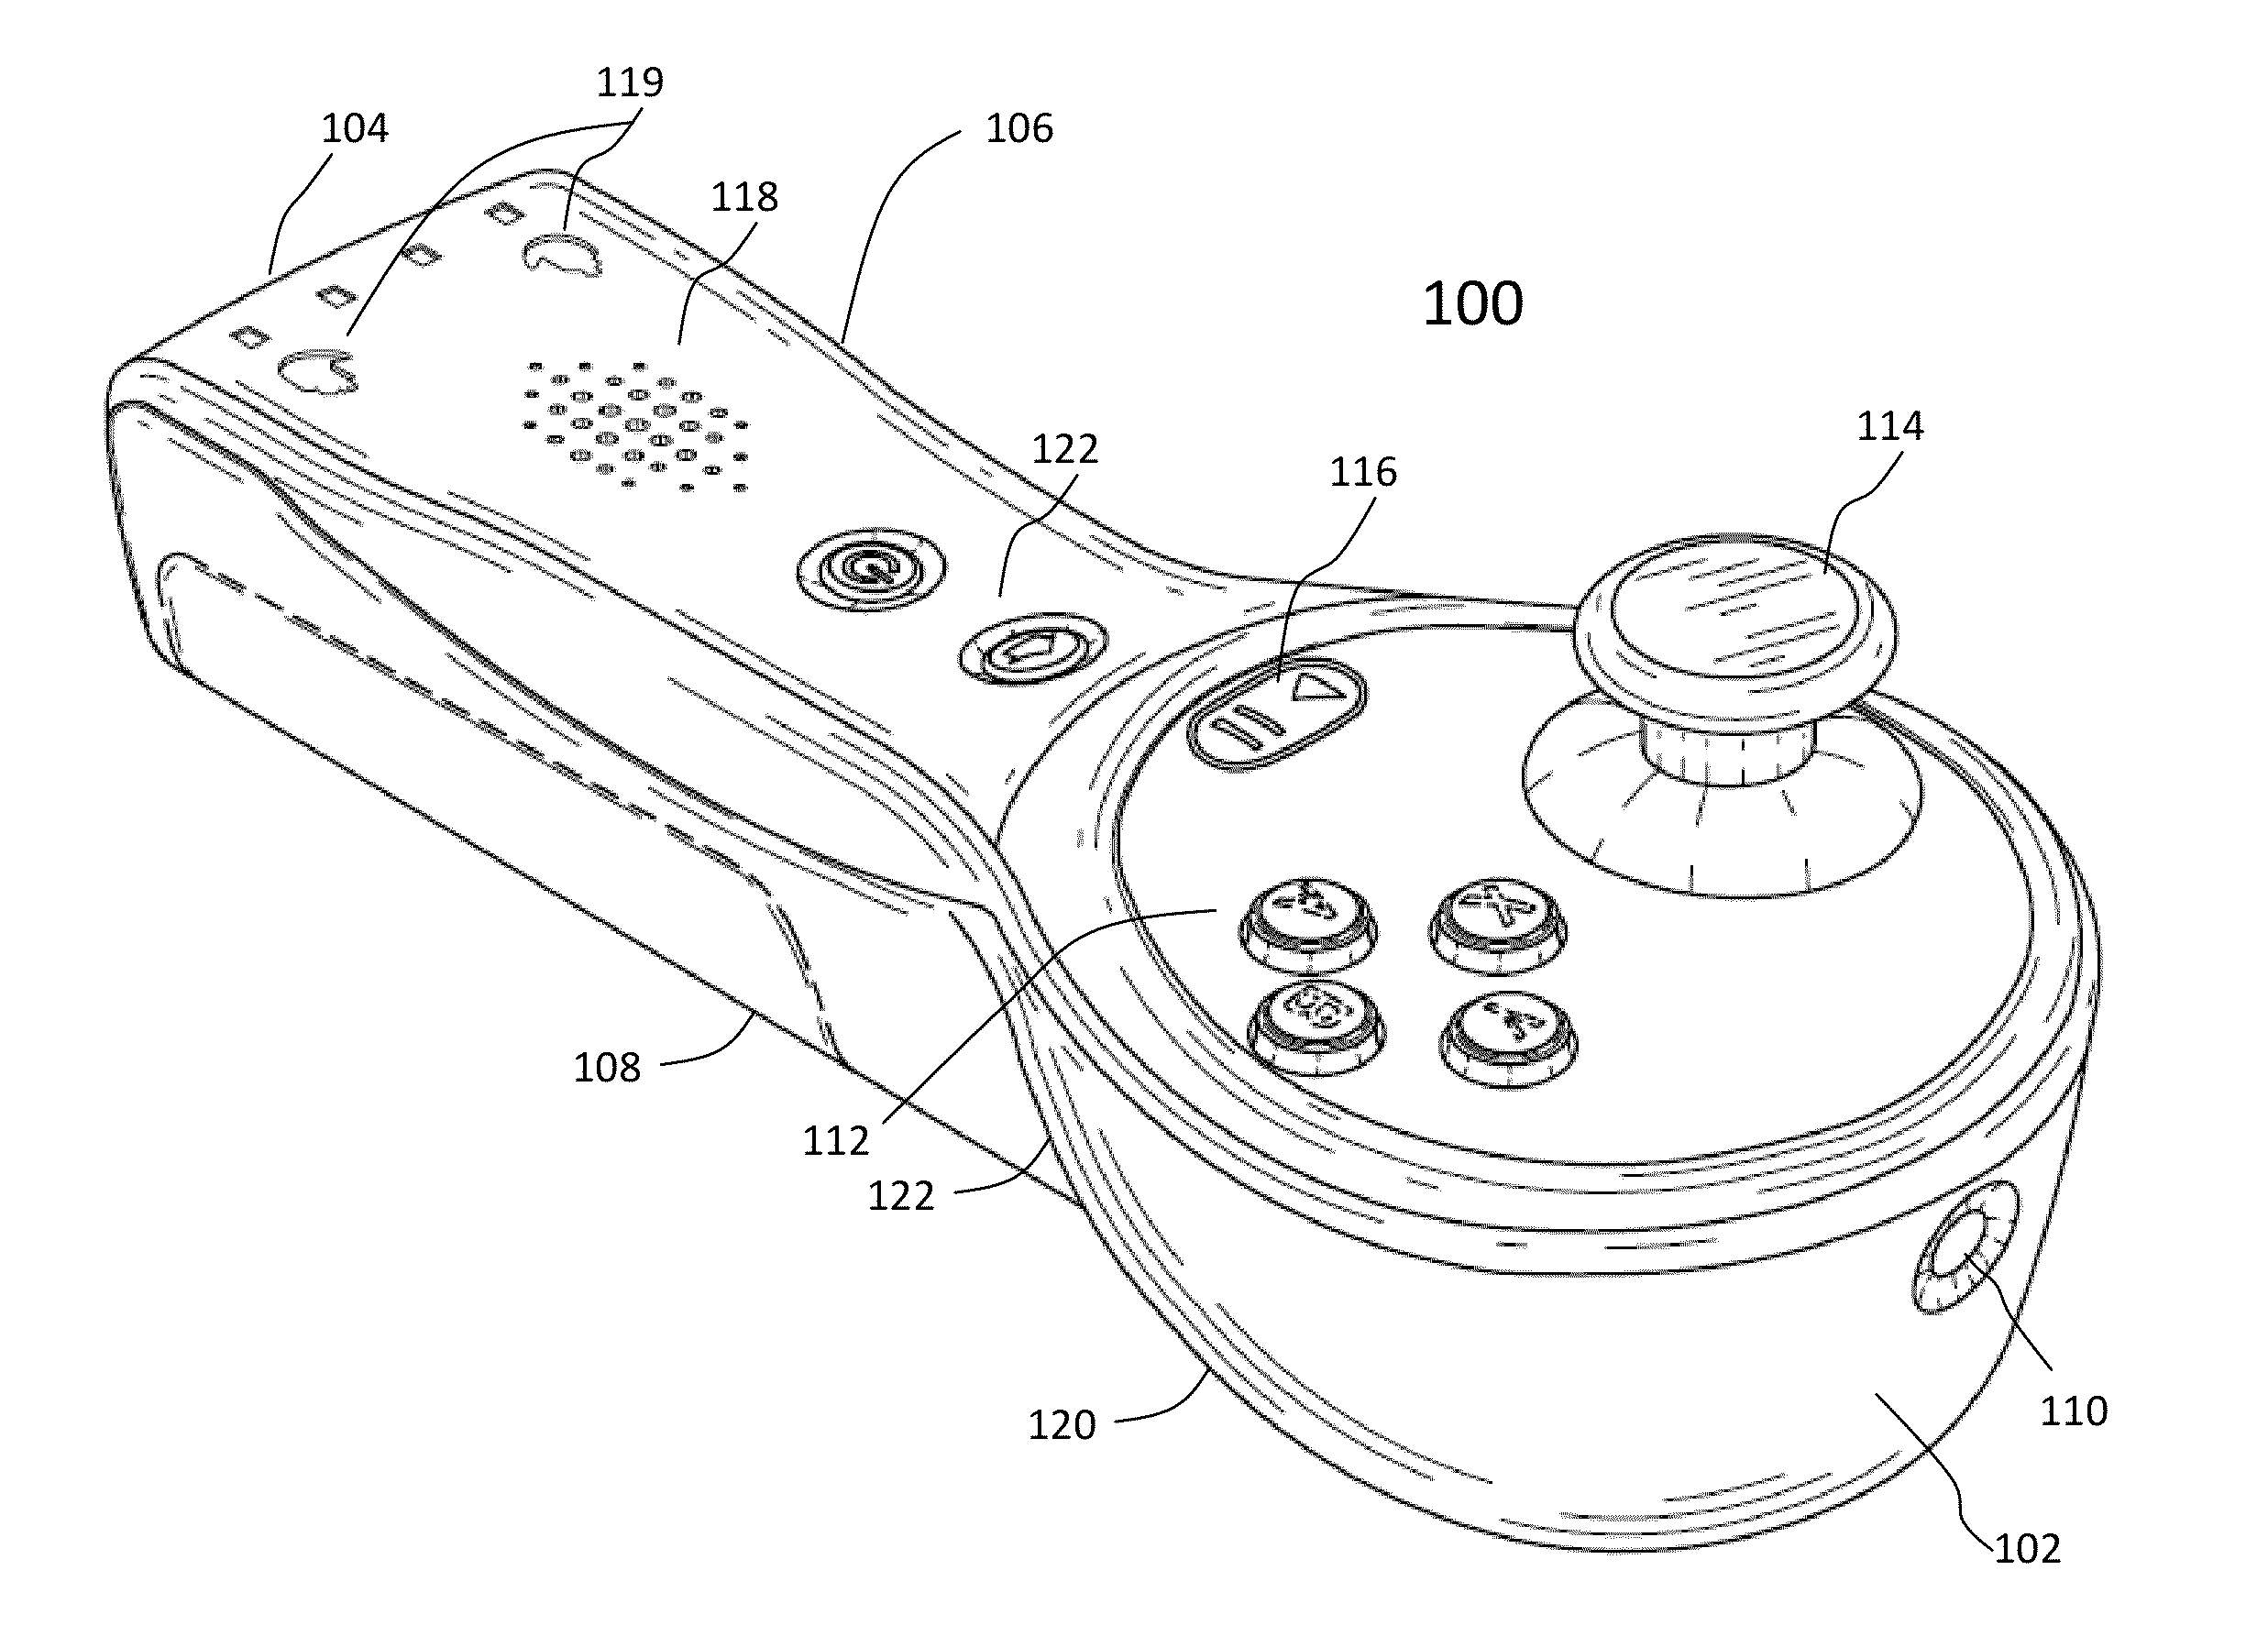 Game controllers with full controlling mechanisms